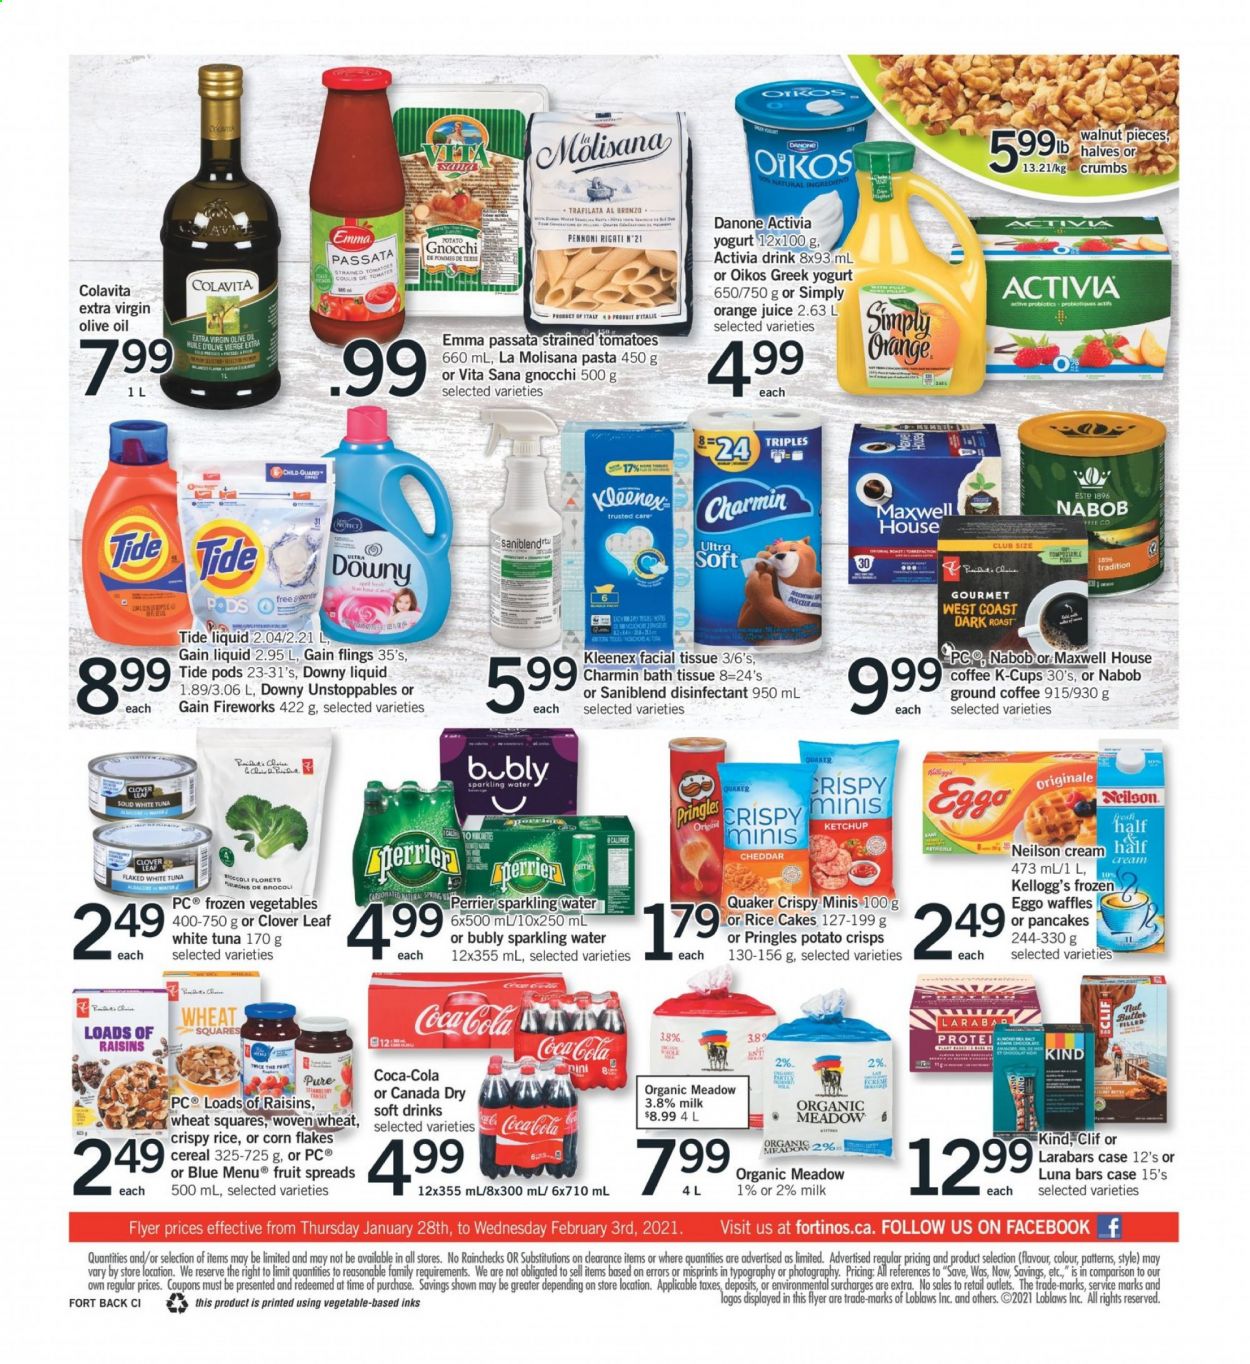 thumbnail - Fortinos Flyer - January 28, 2021 - February 03, 2021 - Sales products - waffles, tomatoes, tuna, pasta, Quaker, cheese, greek yoghurt, yoghurt, Clover, Activia, Oikos, milk, frozen vegetables, Kellogg's, potato crisps, Pringles, cereals, corn flakes, extra virgin olive oil, olive oil, oil, nut butter, walnuts, dried fruit, Canada Dry, Coca-Cola, orange juice, juice, soft drink, Perrier, sparkling water, Maxwell House, coffee, ground coffee, coffee capsules, K-Cups, bath tissue, Kleenex, Charmin, Gain, Tide, Gain Fireworks, Downy Laundry, probiotics, Danone, gnocchi, raisins, desinfection. Page 2.